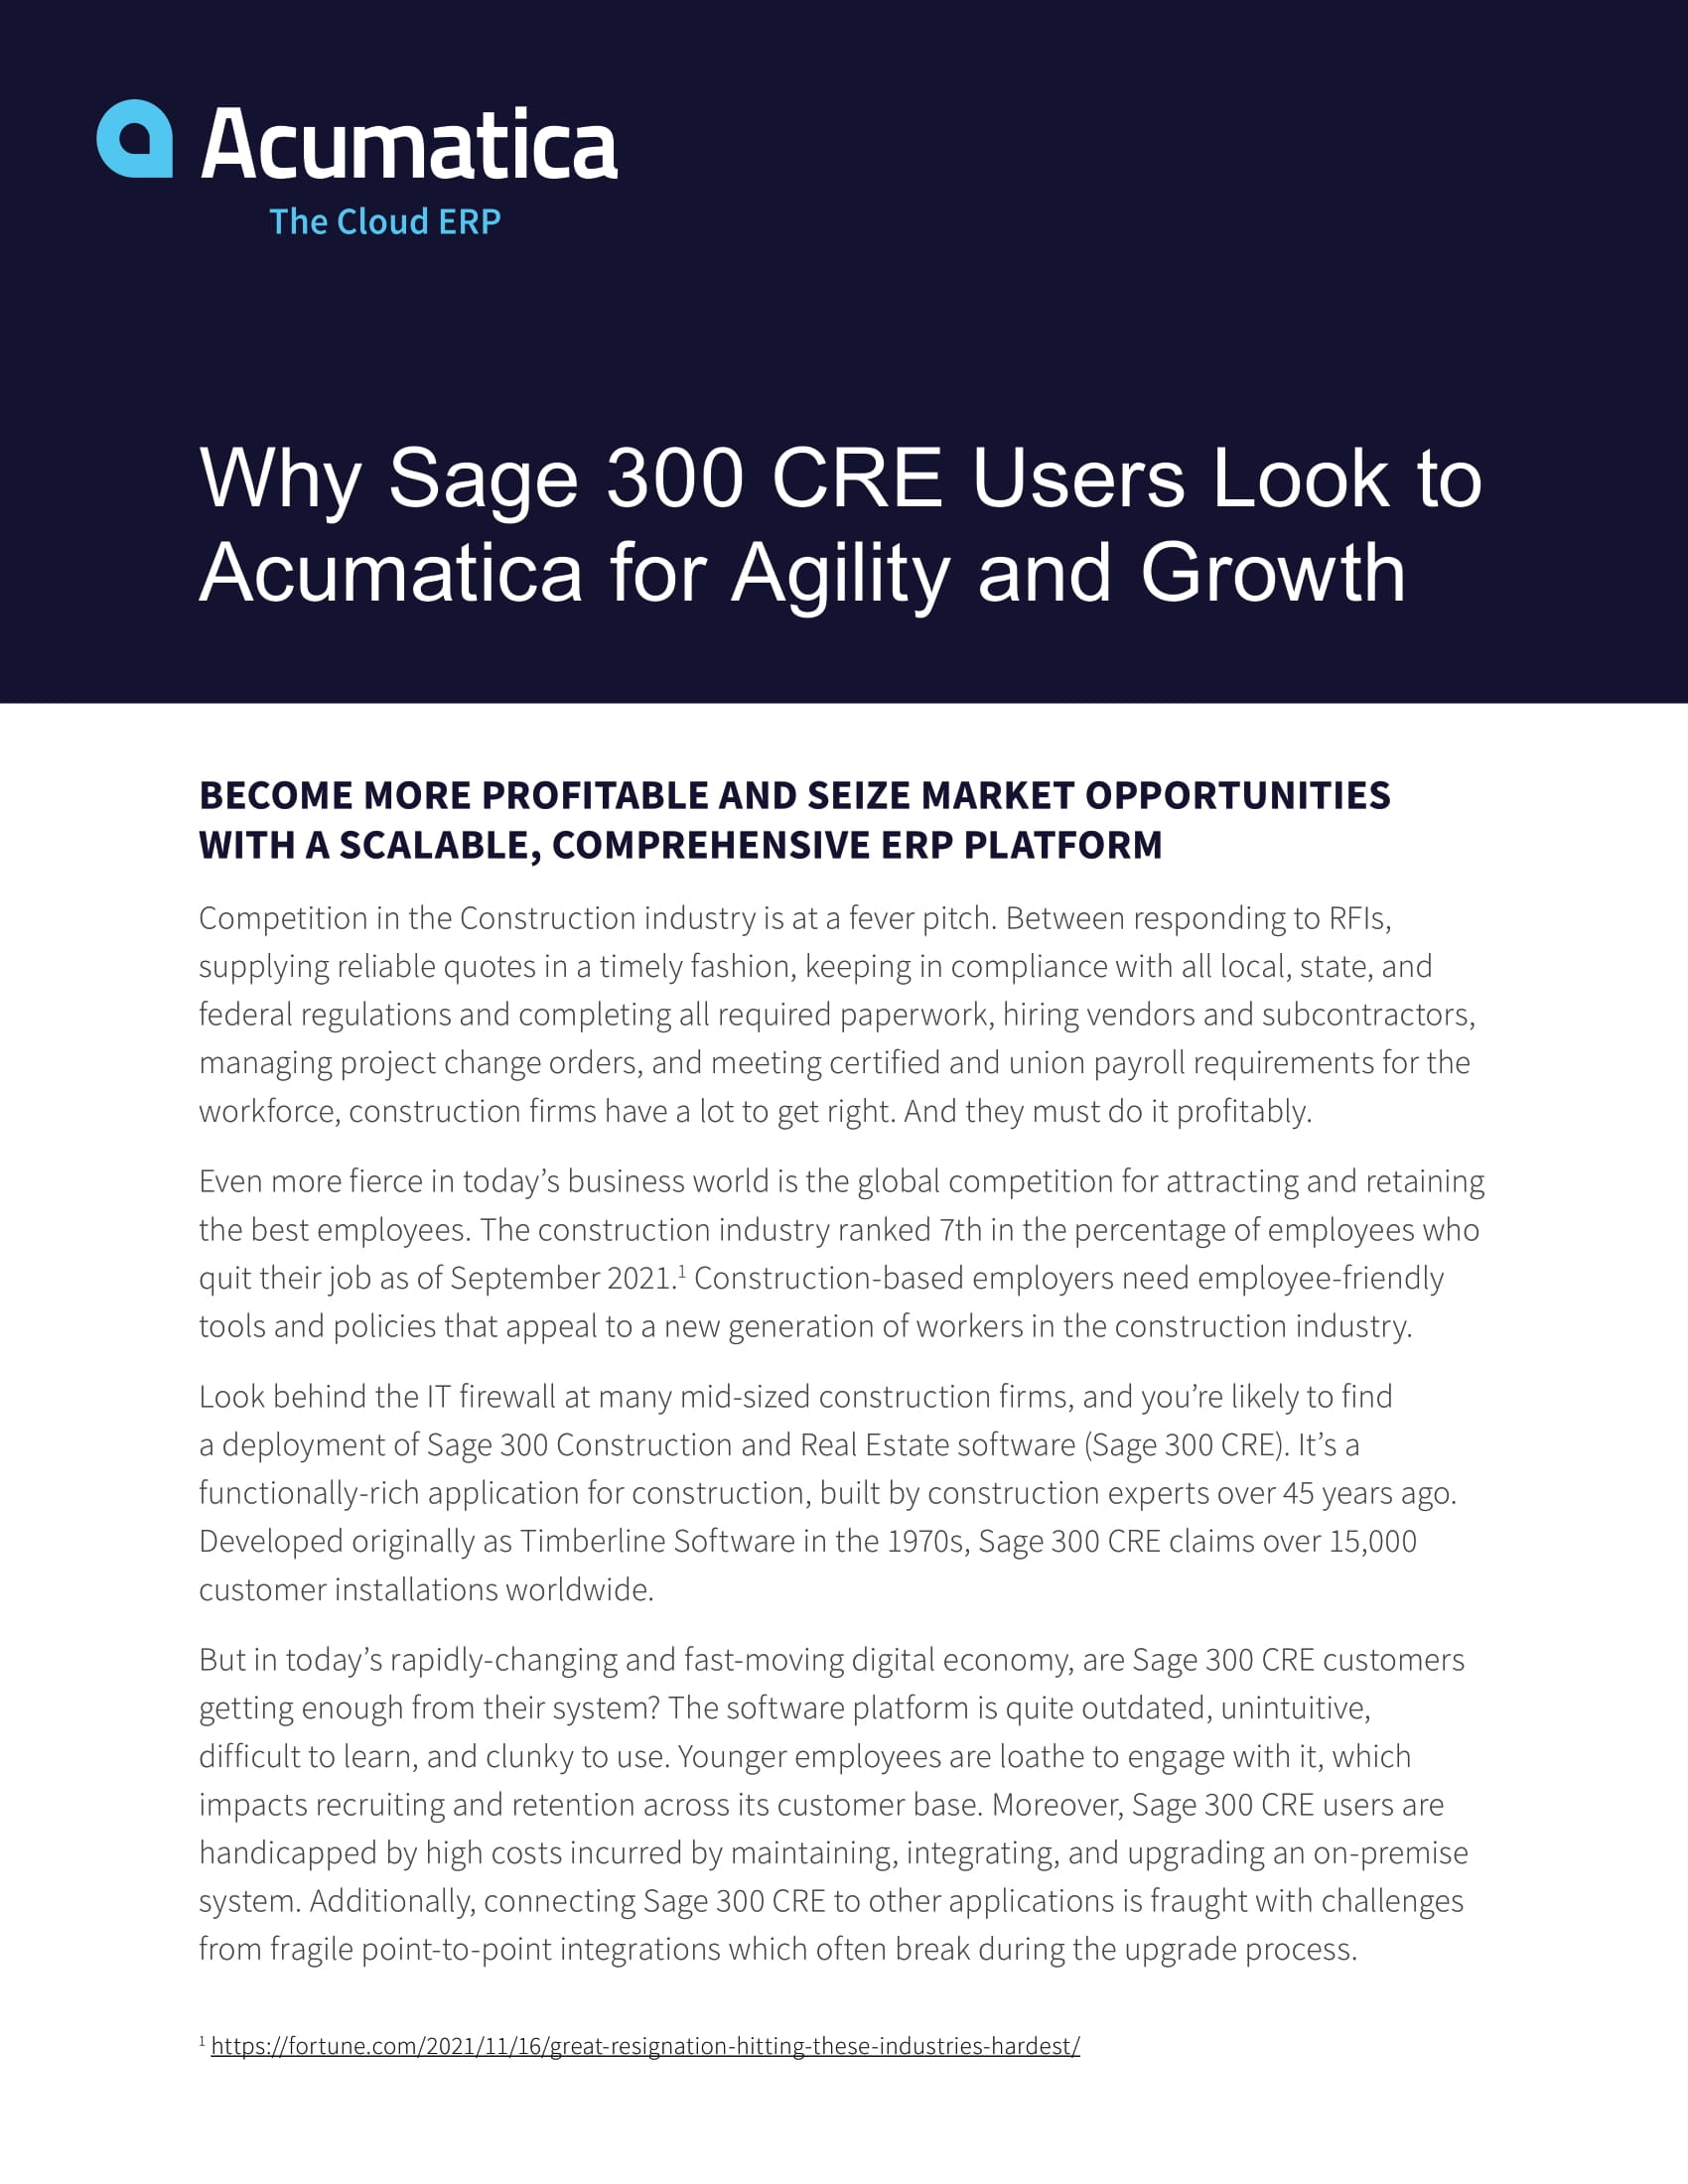 Why Construction Companies Are Moving From Sage 300 CRE to Acumatica, page 0